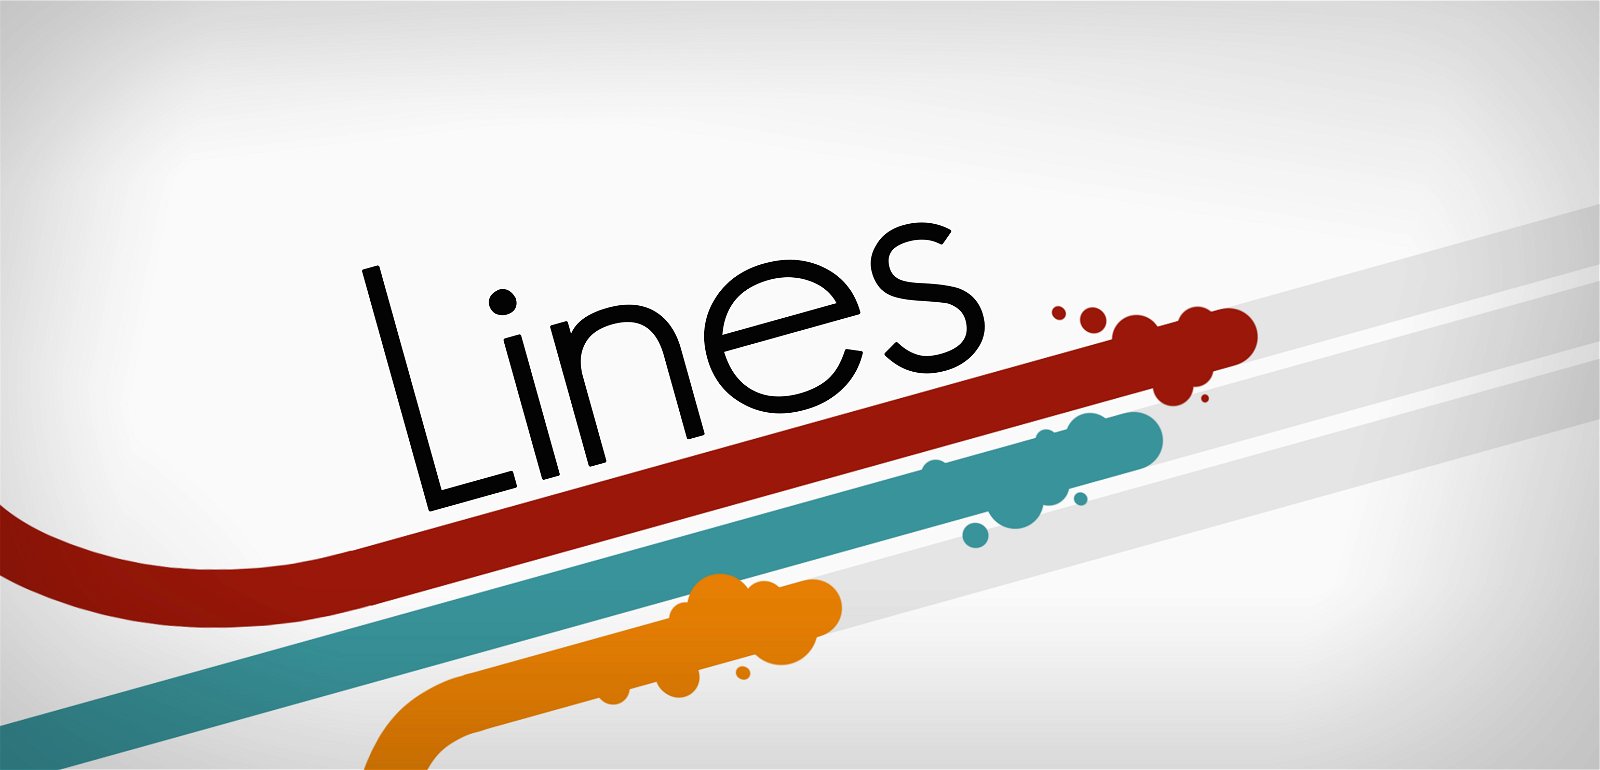 Image of Lines